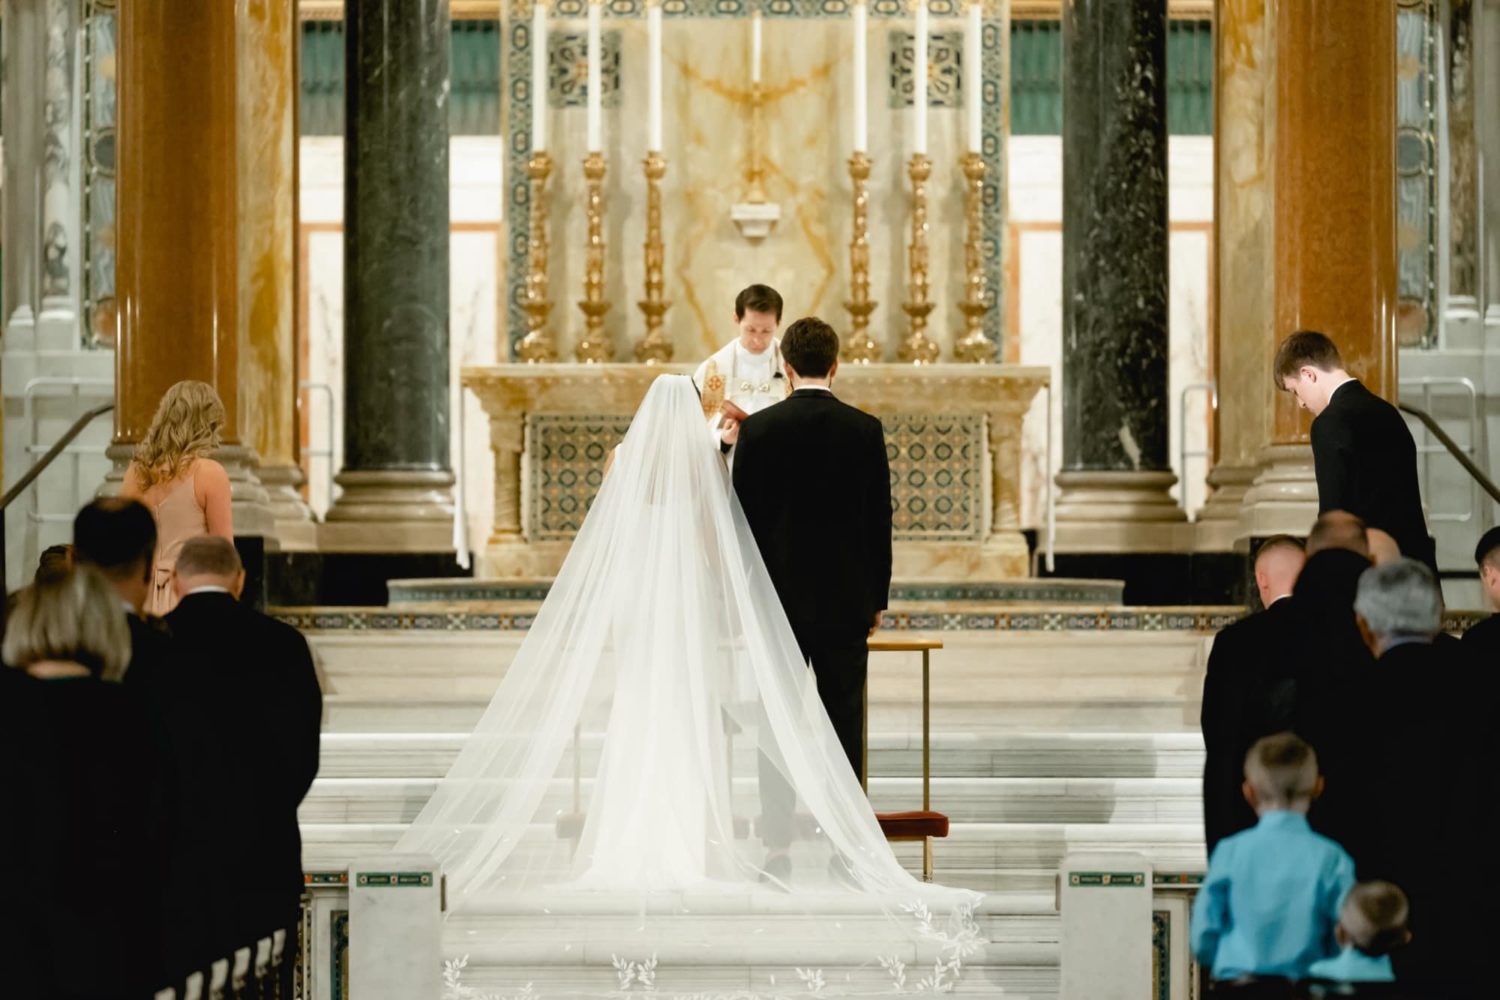 Bride and groom at the altar at the Cathedral Basilica of St. Louis in Missouri